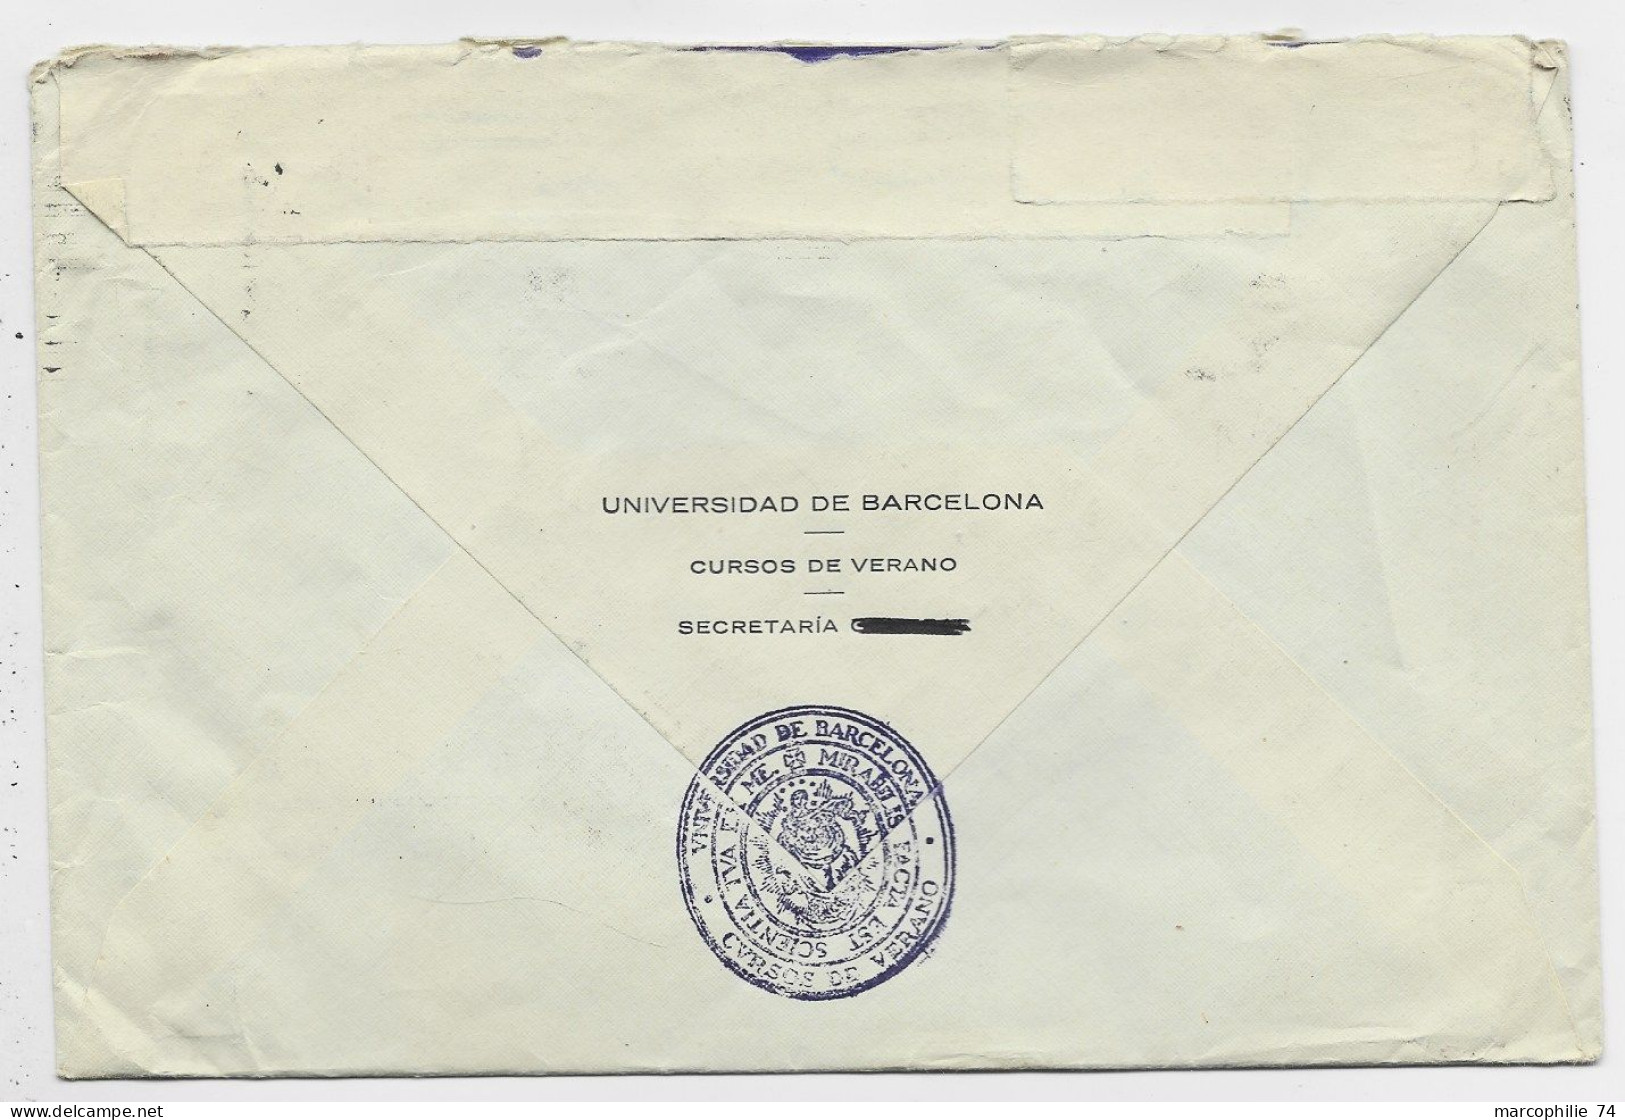 ESPANA 2PTAS SOLO LETTRE COVER TO ENGLAND REEXPEDIEE ENGLAND 4D SOLO  1953 OXFORD TO CADIZ SPAIN - Lettres & Documents